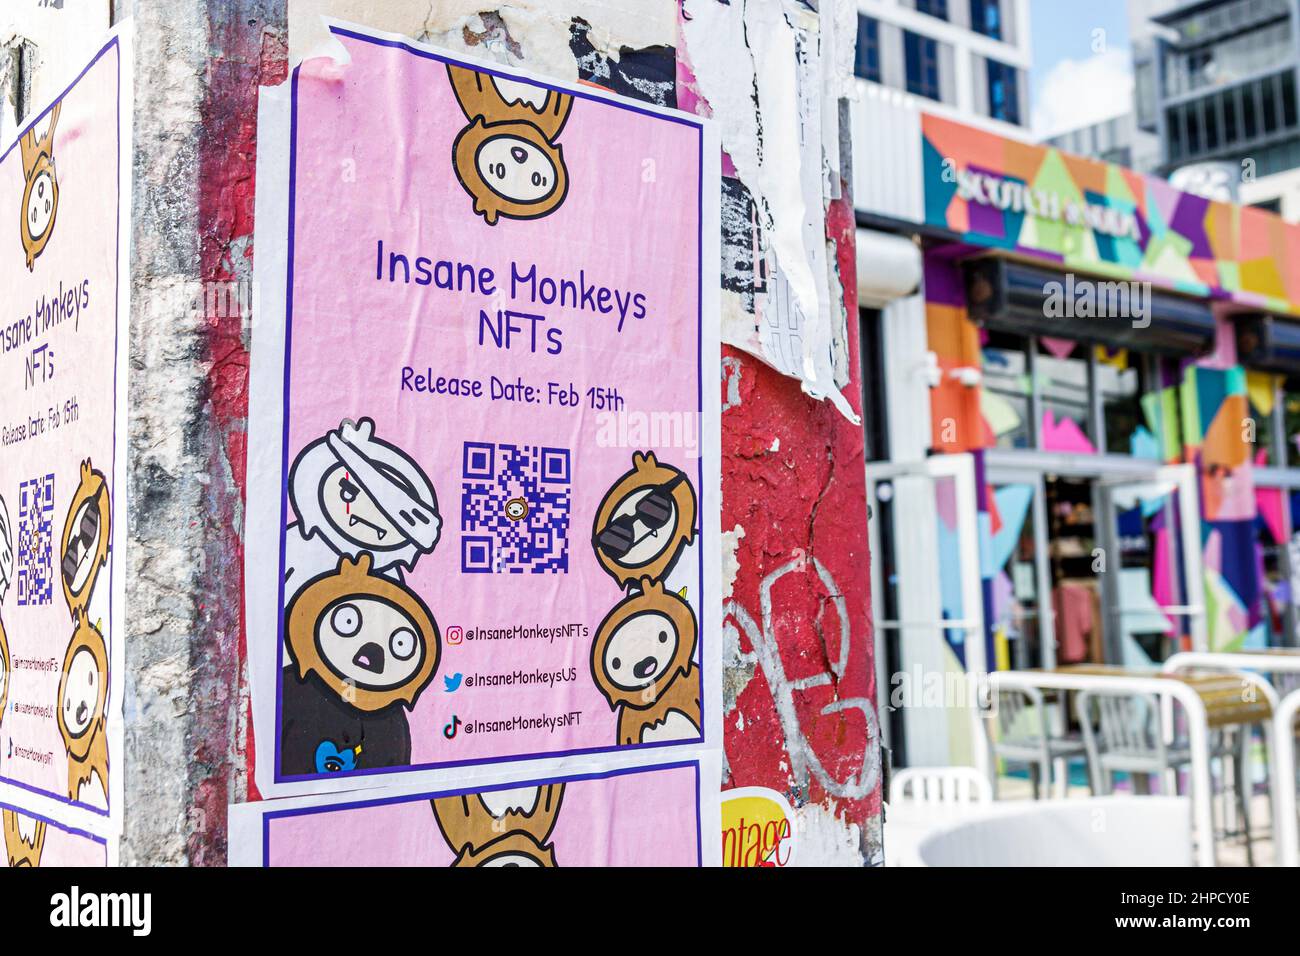 Miami Florida Wynwood Art District posted poster Insane Monkey NFTs NFT QR code offer Stock Photo